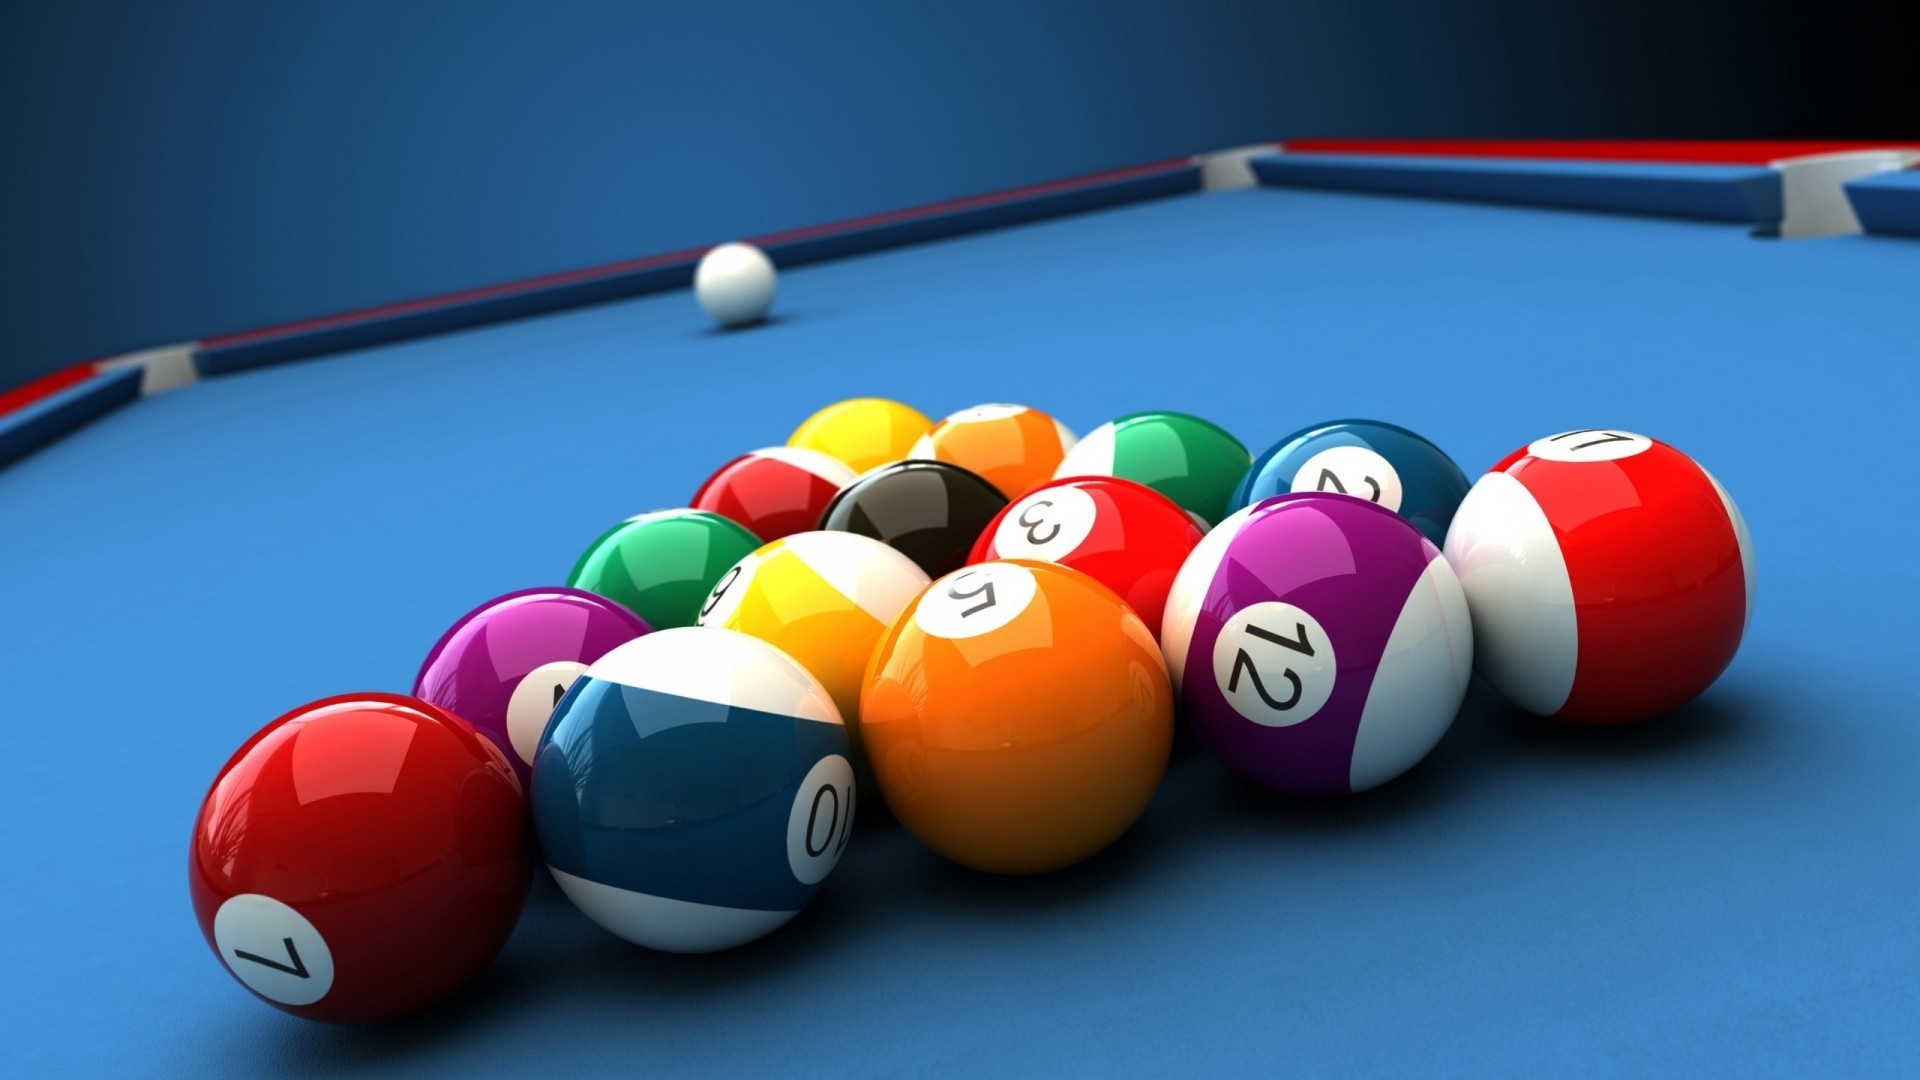 1920x1080 Use our 8 Ball Pool Hack Tool